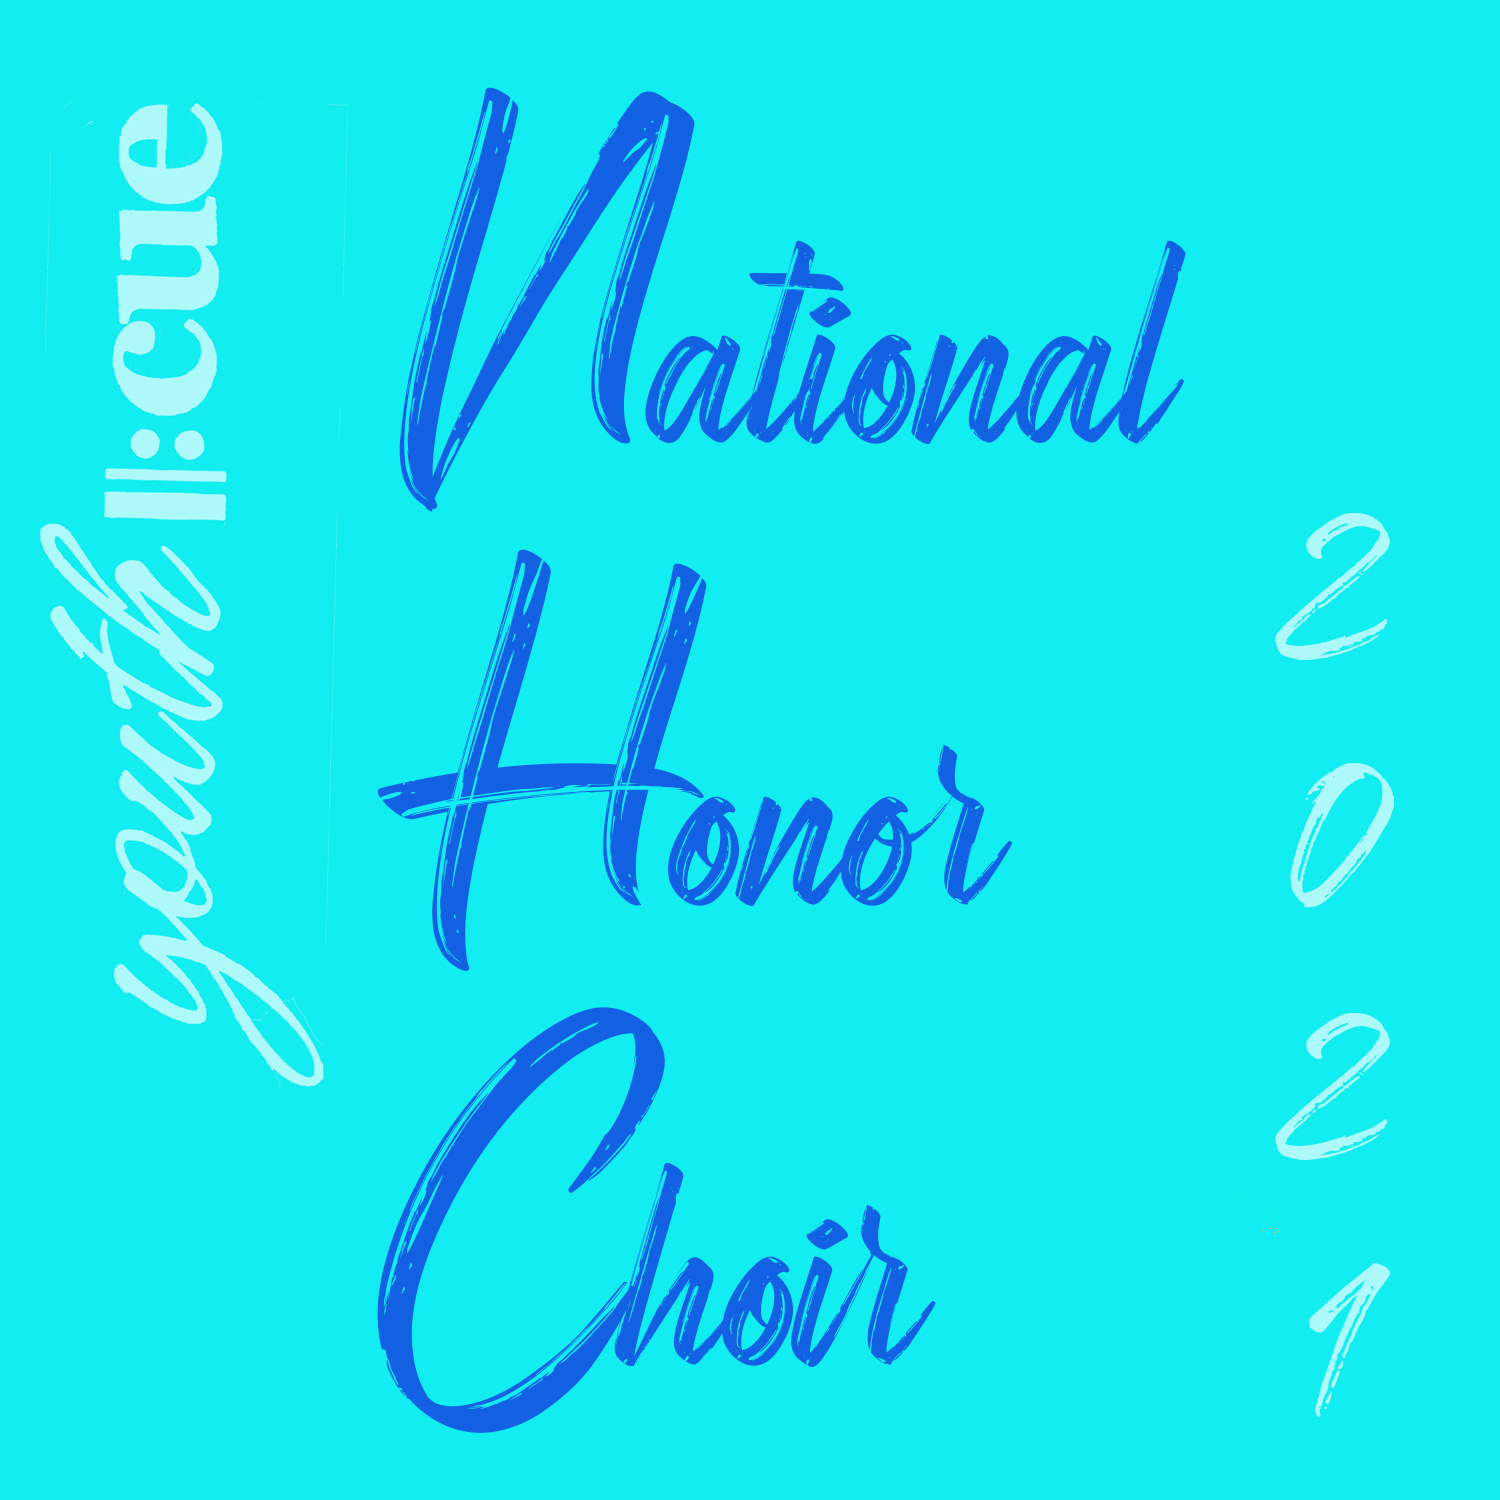 Last Call for the 2021 (Virtual) National Honor Choir YouthCUE